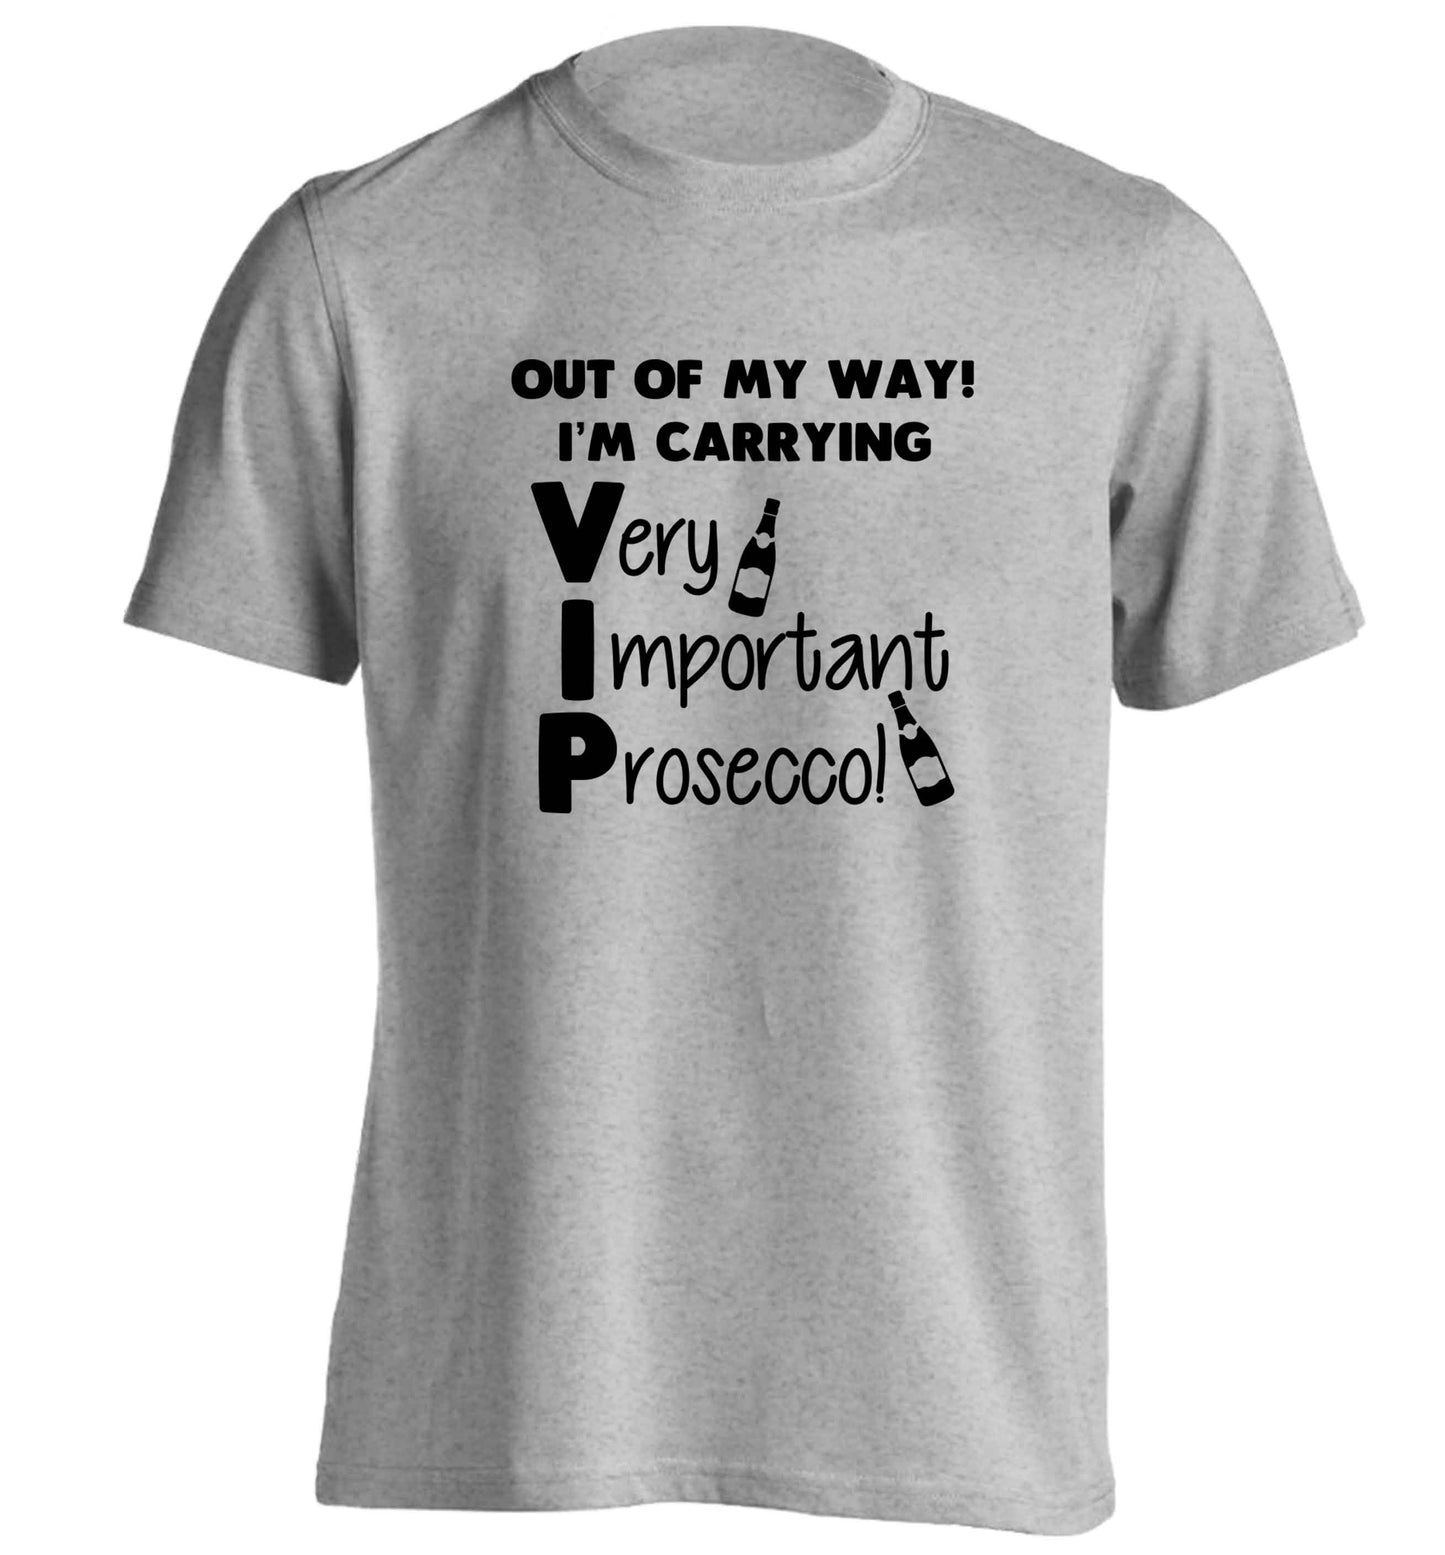 Out of my way I'm carrying very important prosecco! adults unisex grey Tshirt 2XL